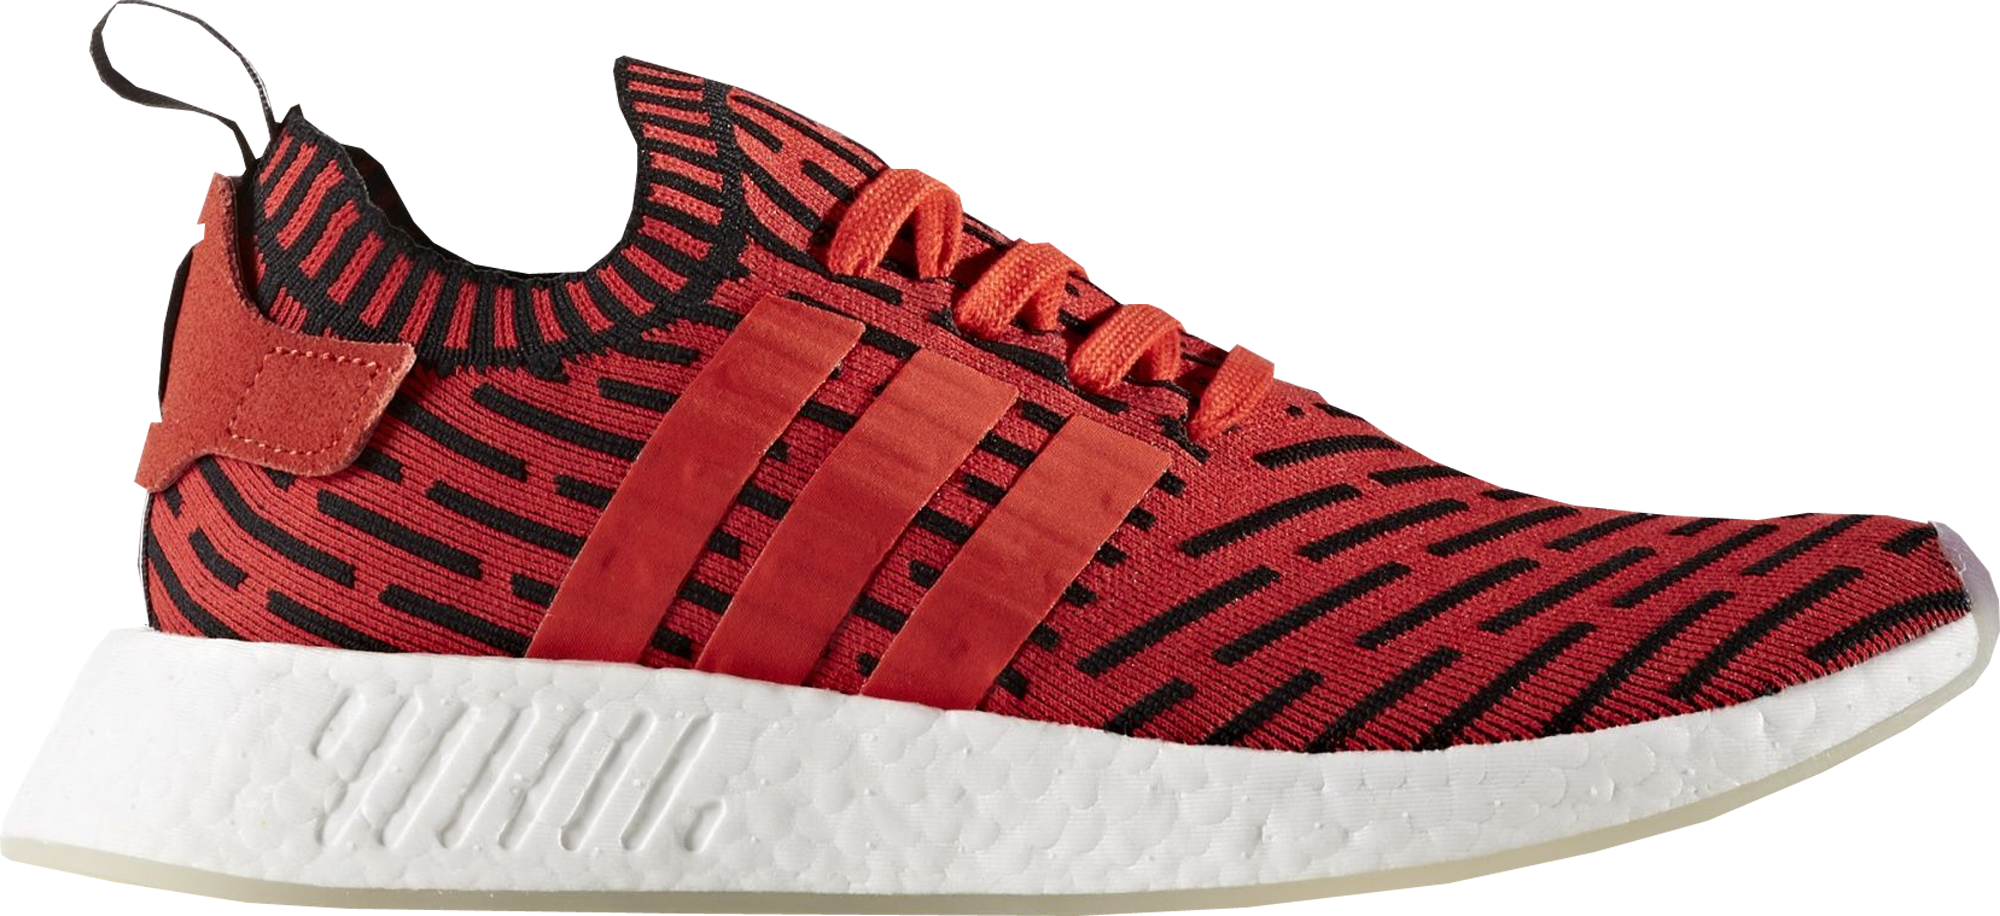 core red nmd